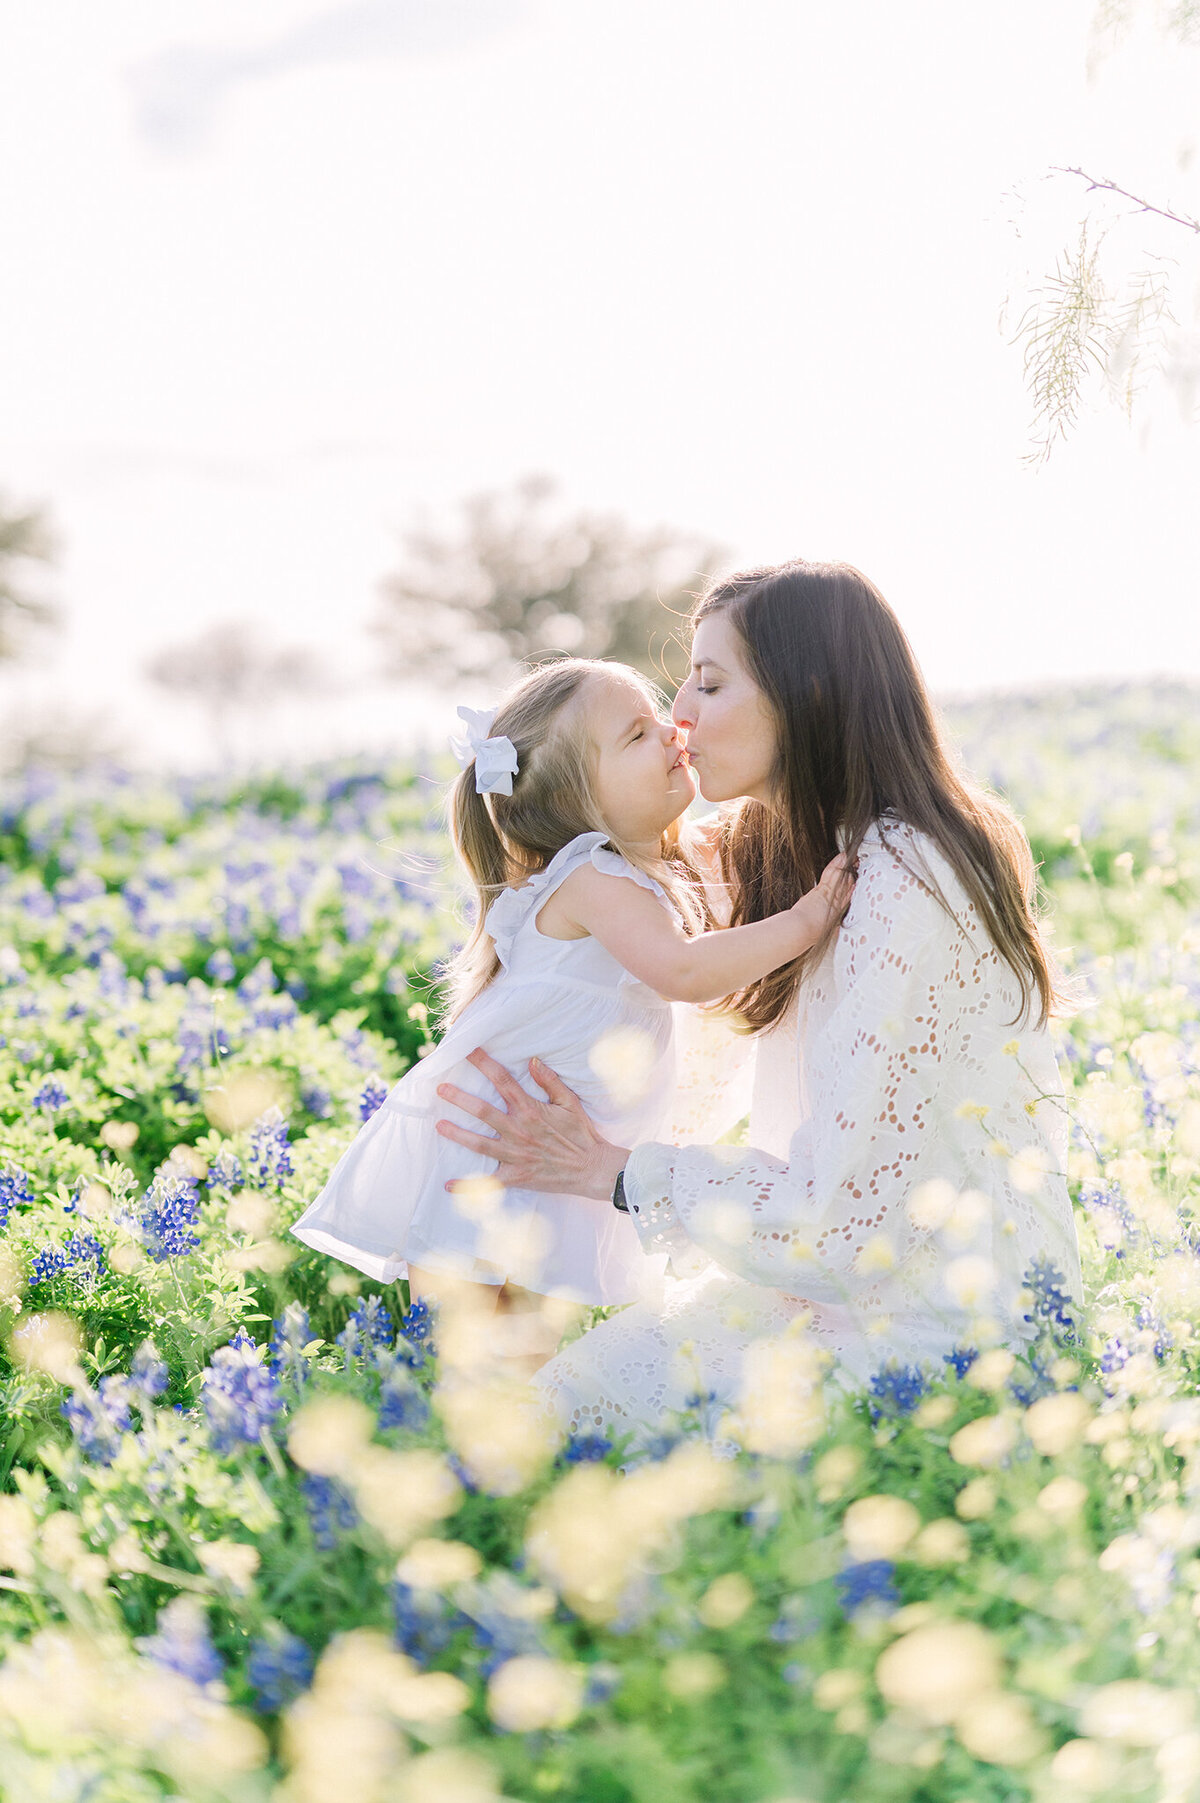 Mother delightfully kissing her toddler in a field of bluebonnets wearing all white.